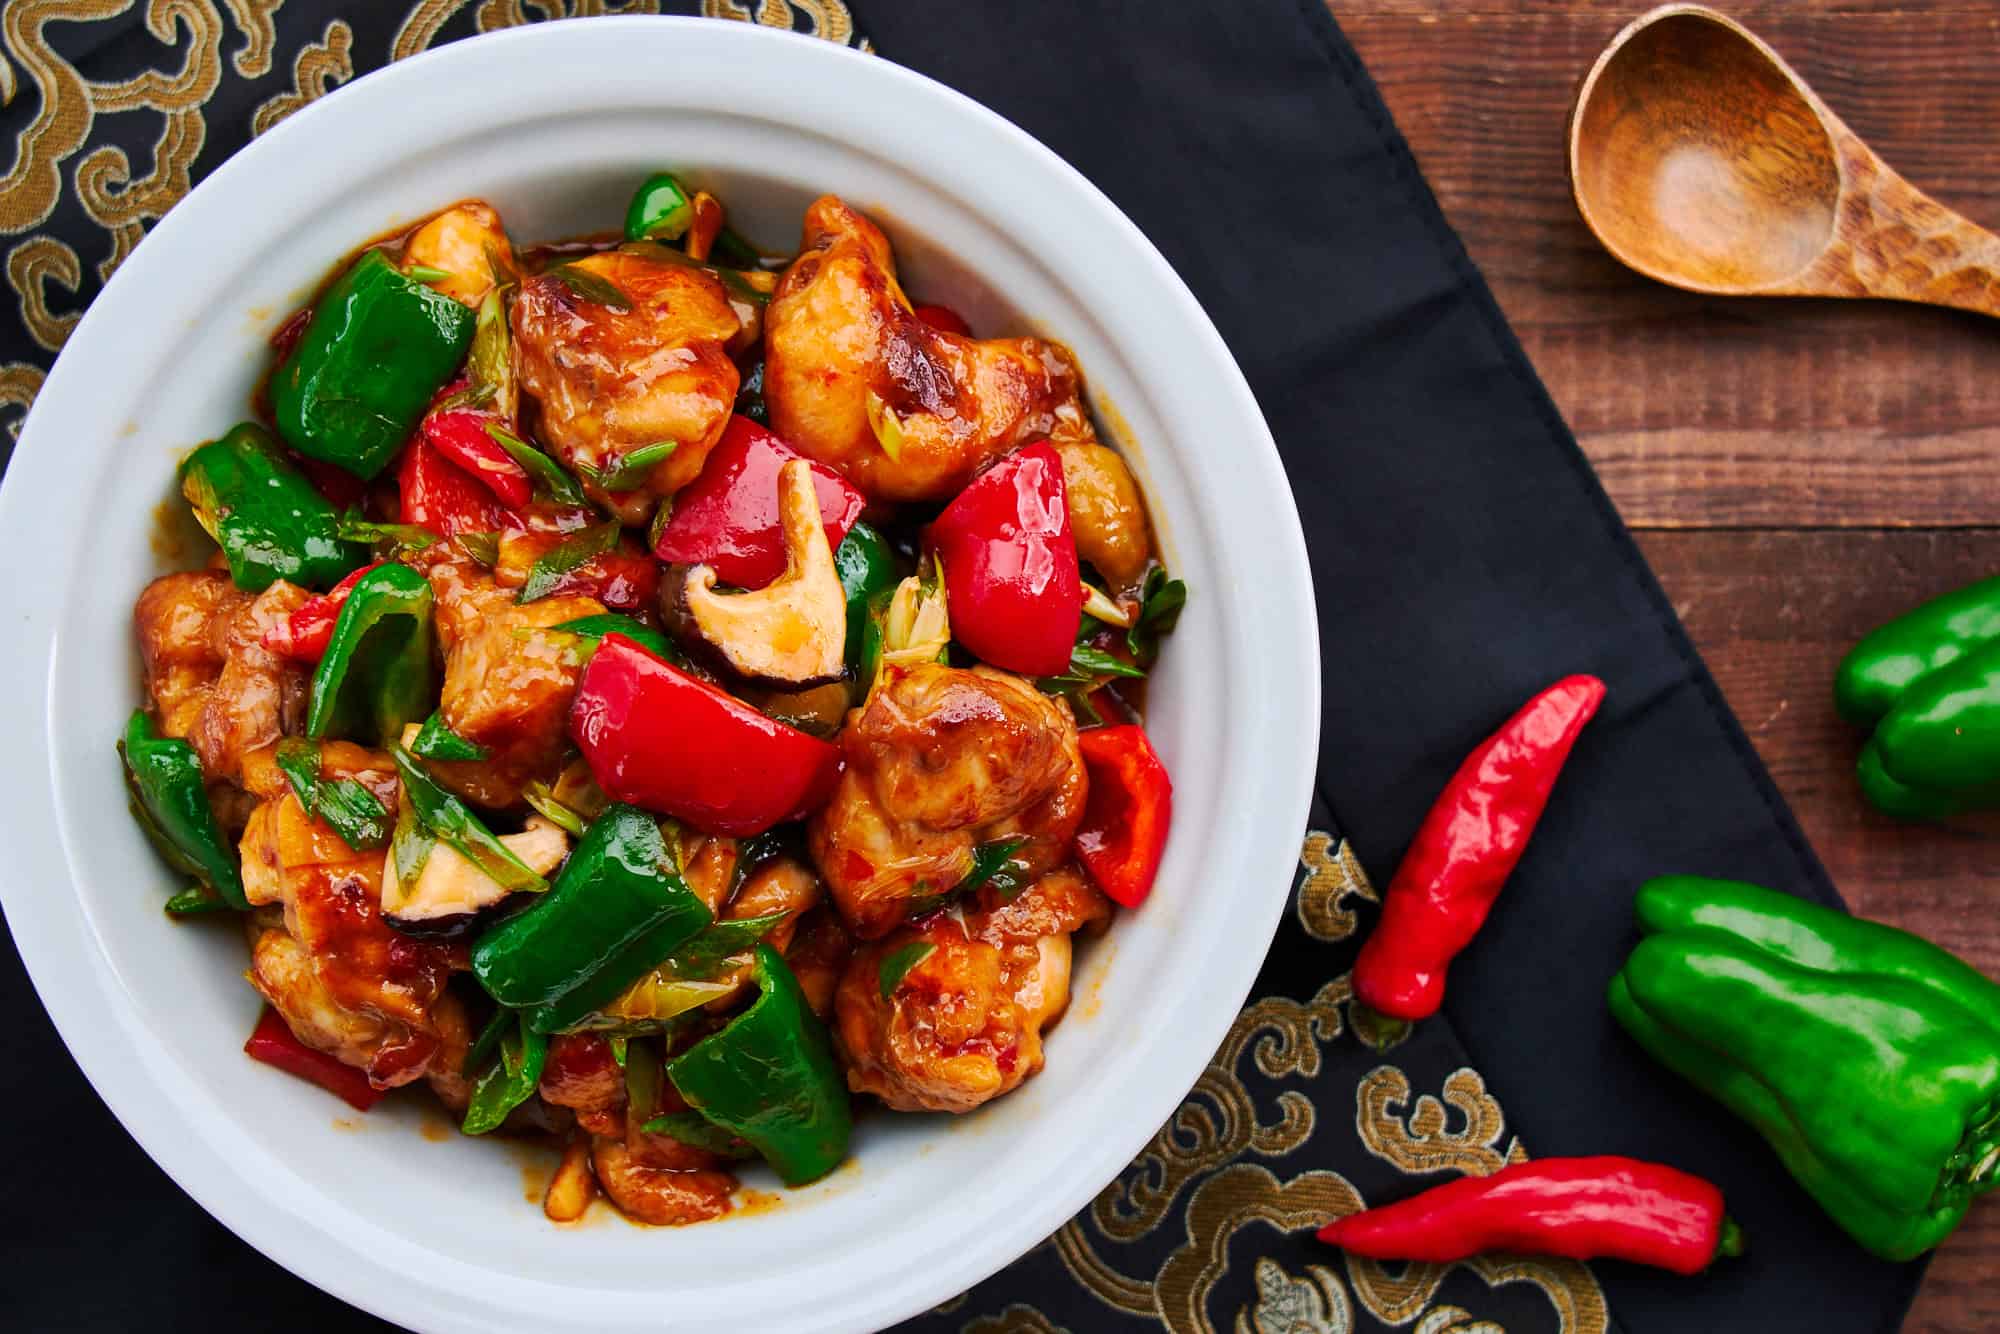 With juicy, flavorful hunks of marinated chicken and a vibrant medley of pepper, this Hunan chicken is a Chinese takeout classic that's easy to make at home.